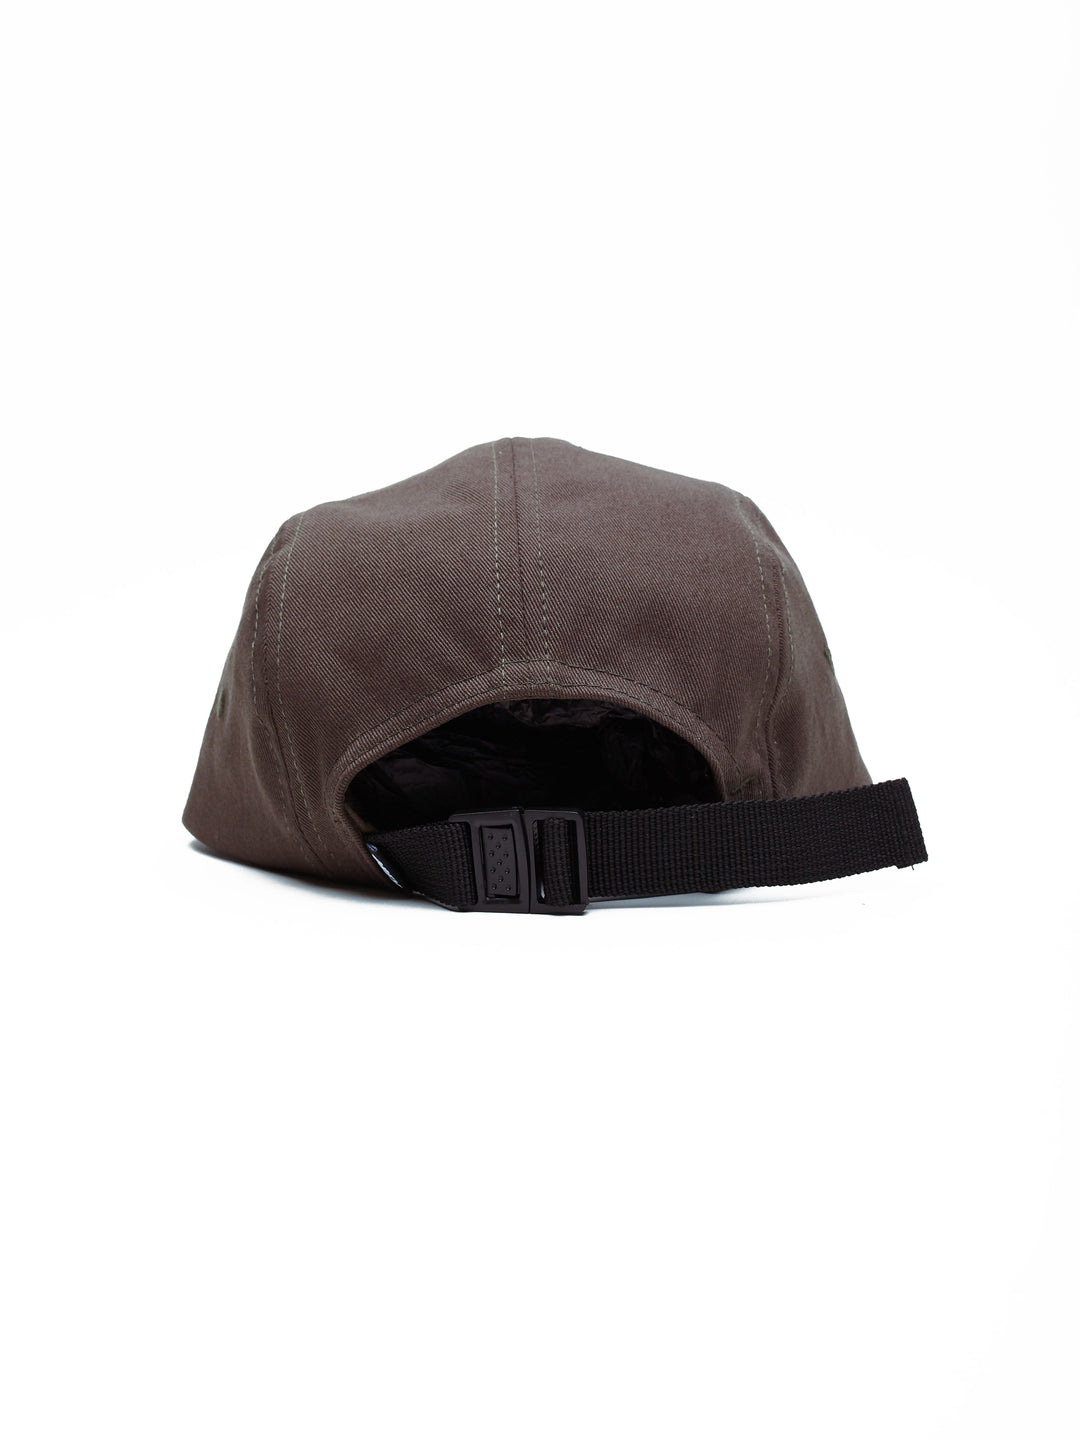 Integrity 5 Panel Hat / Army - West of Camden - Main Image Number 2 of 2